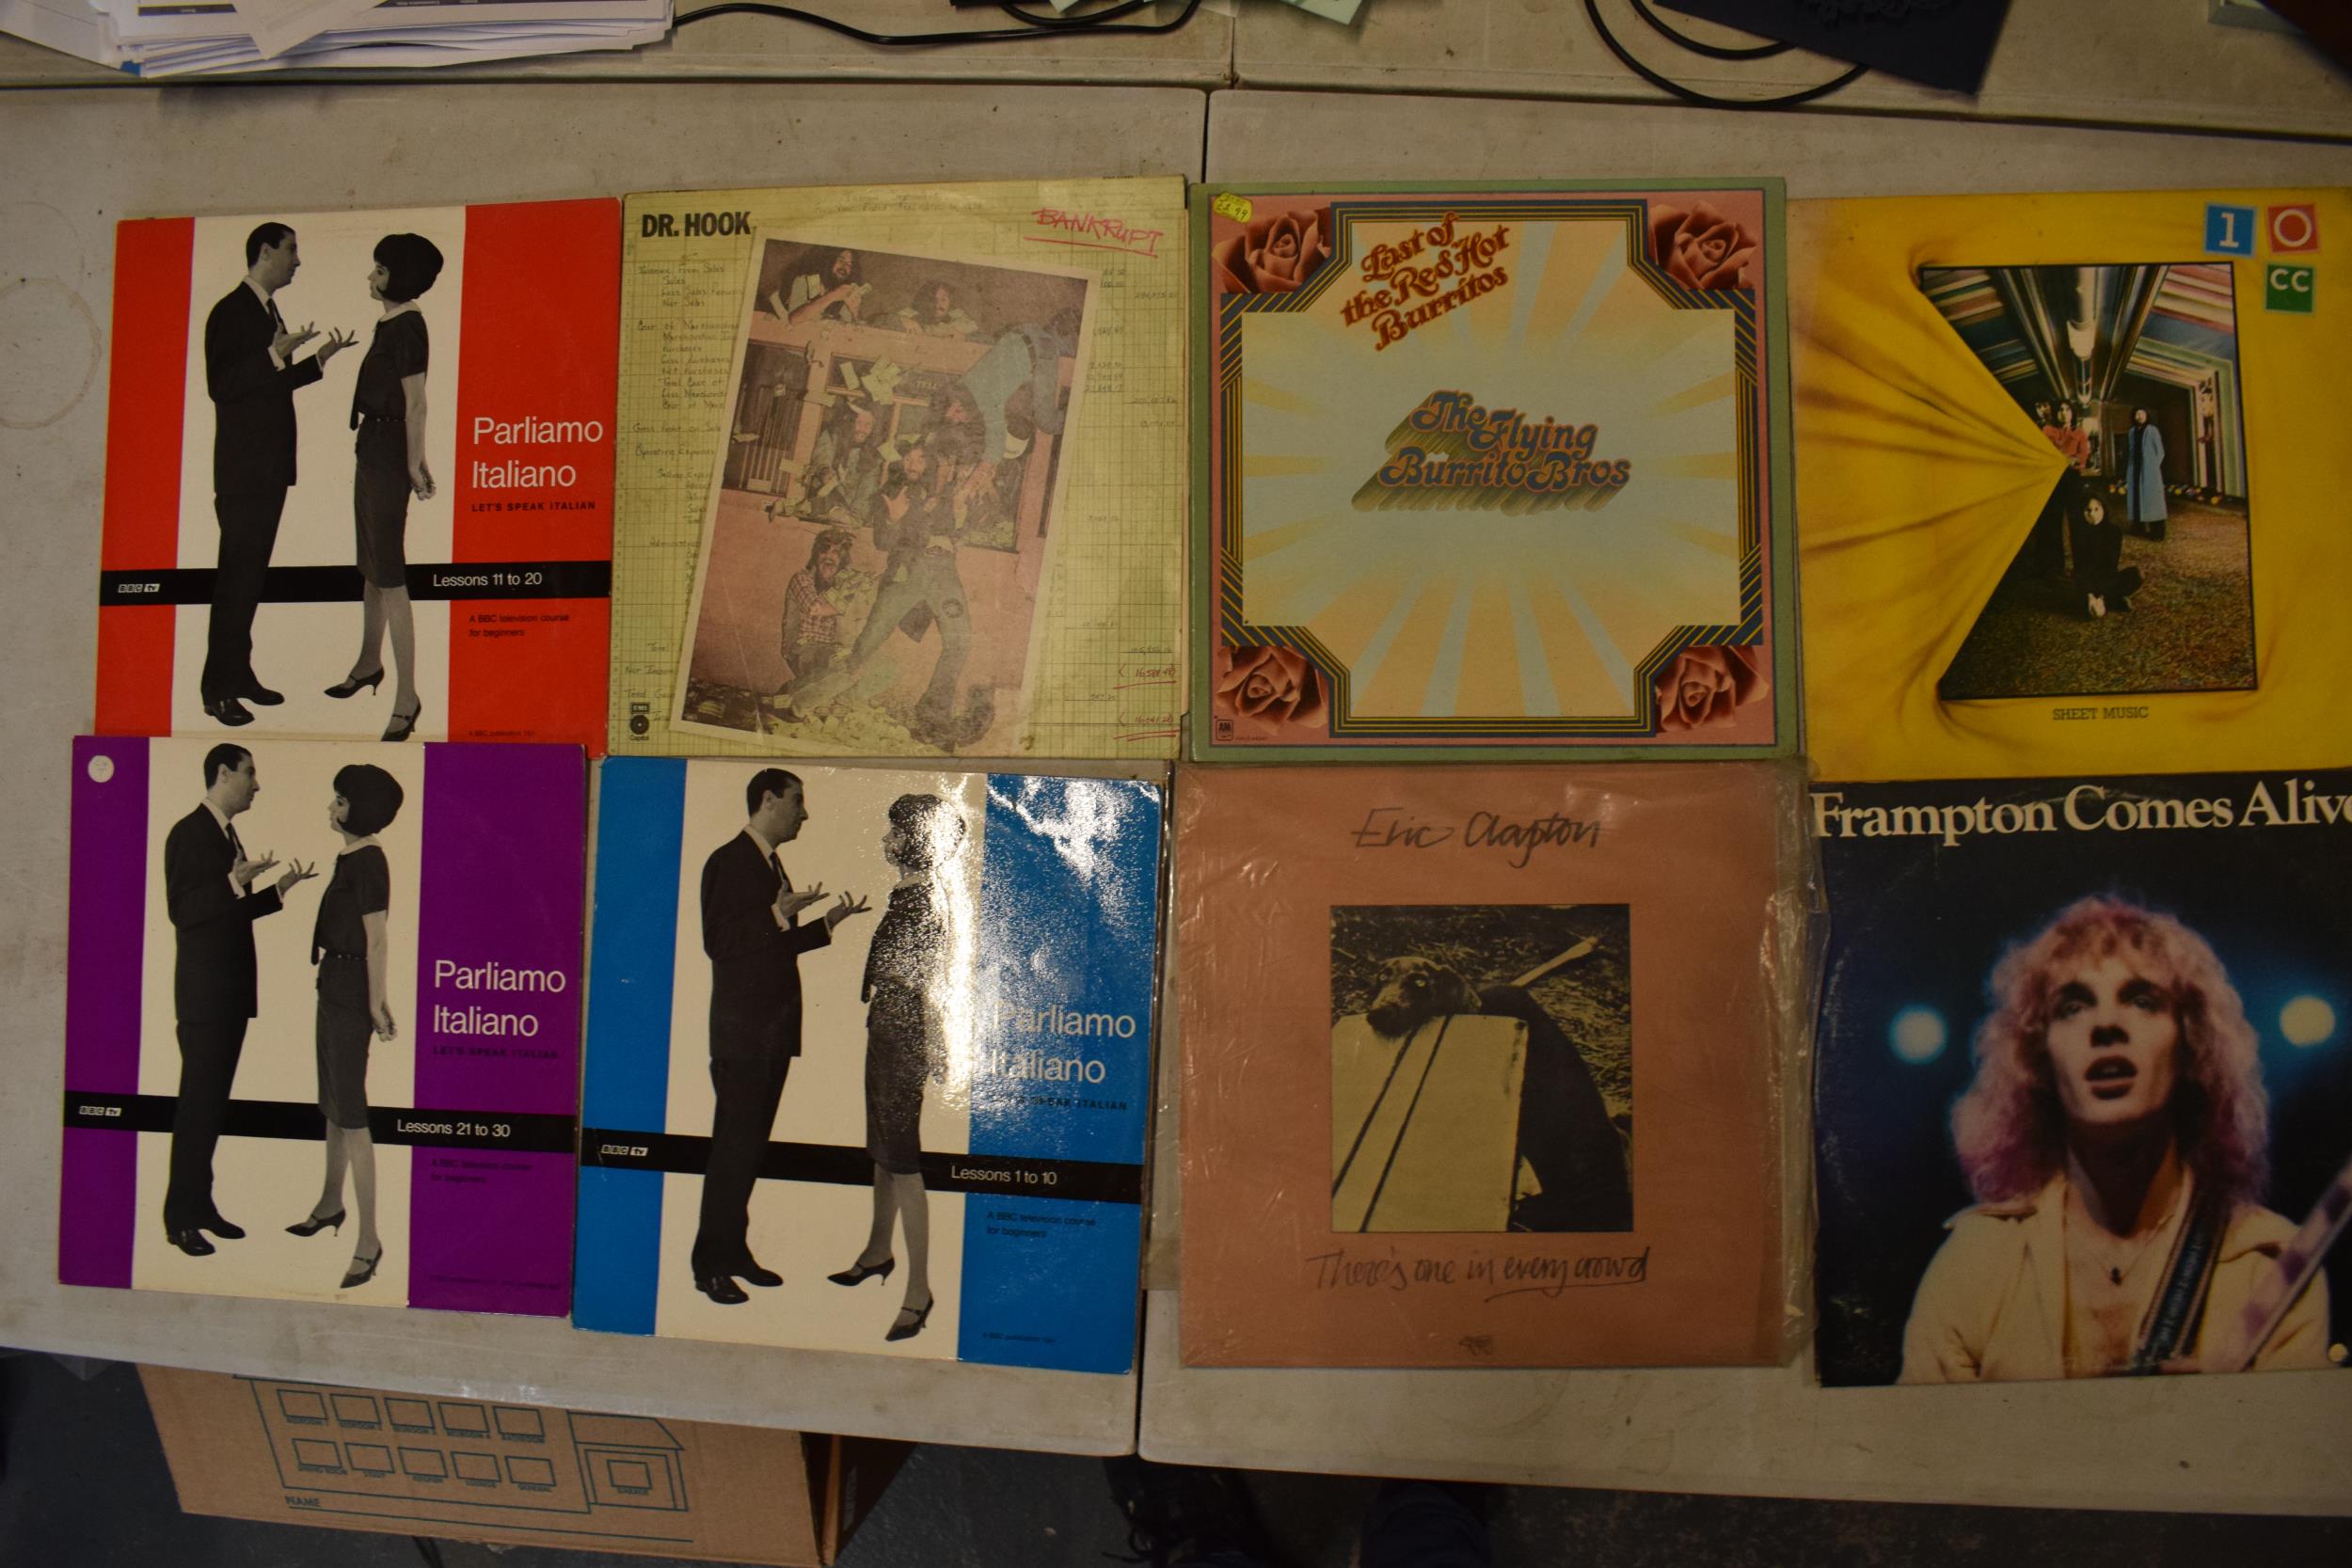 A collection of vinyl records to include artists such as Eric Clapton, Yes, Wishbone Ash and other